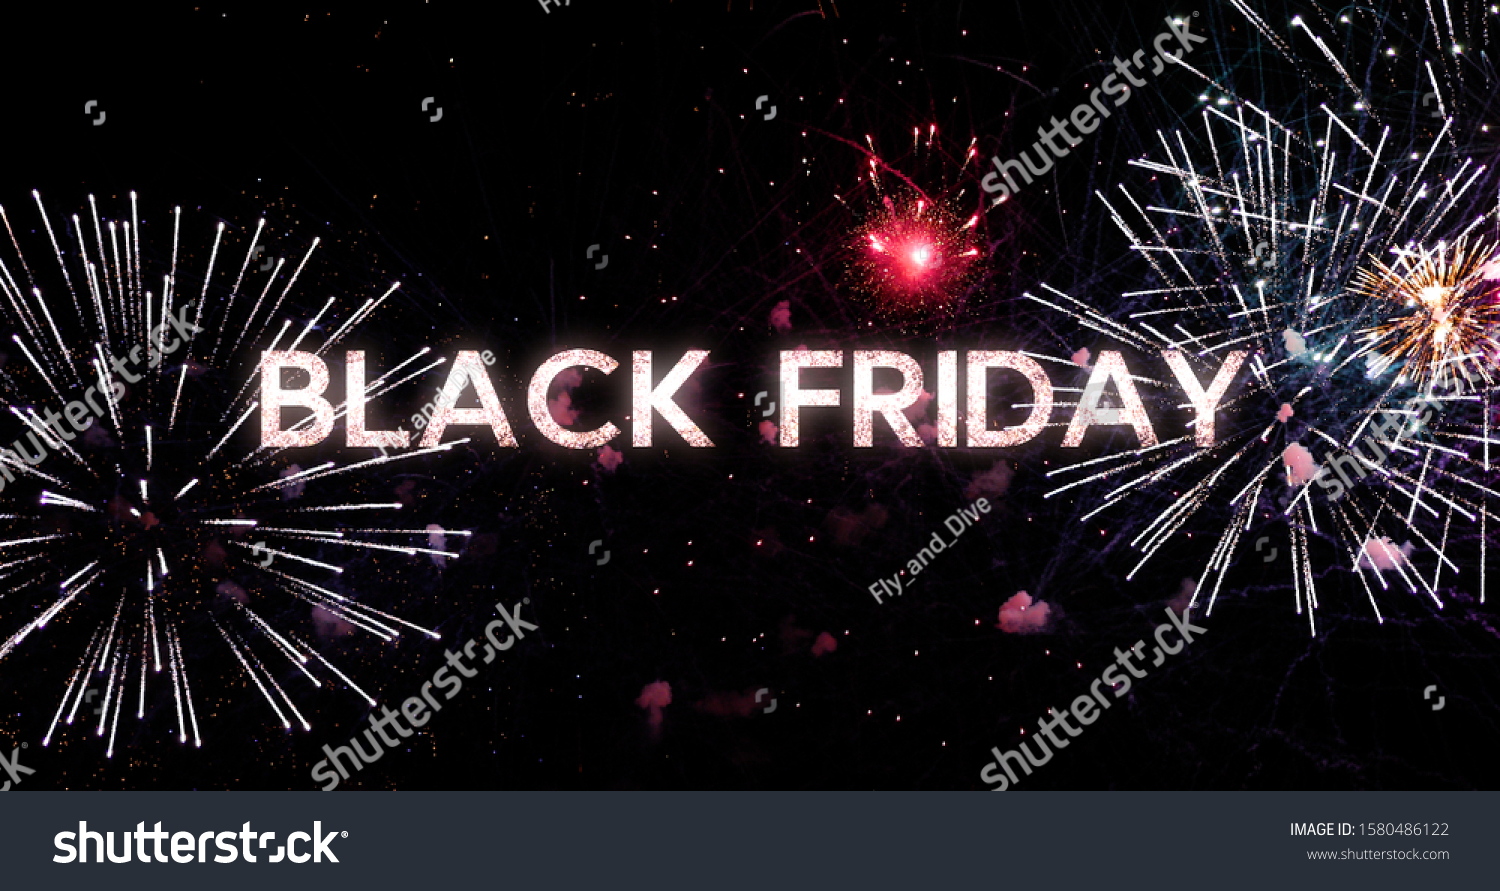 Black Friday sale. Video sequences with firework in the background Black Friday sale promotion video #1580486122